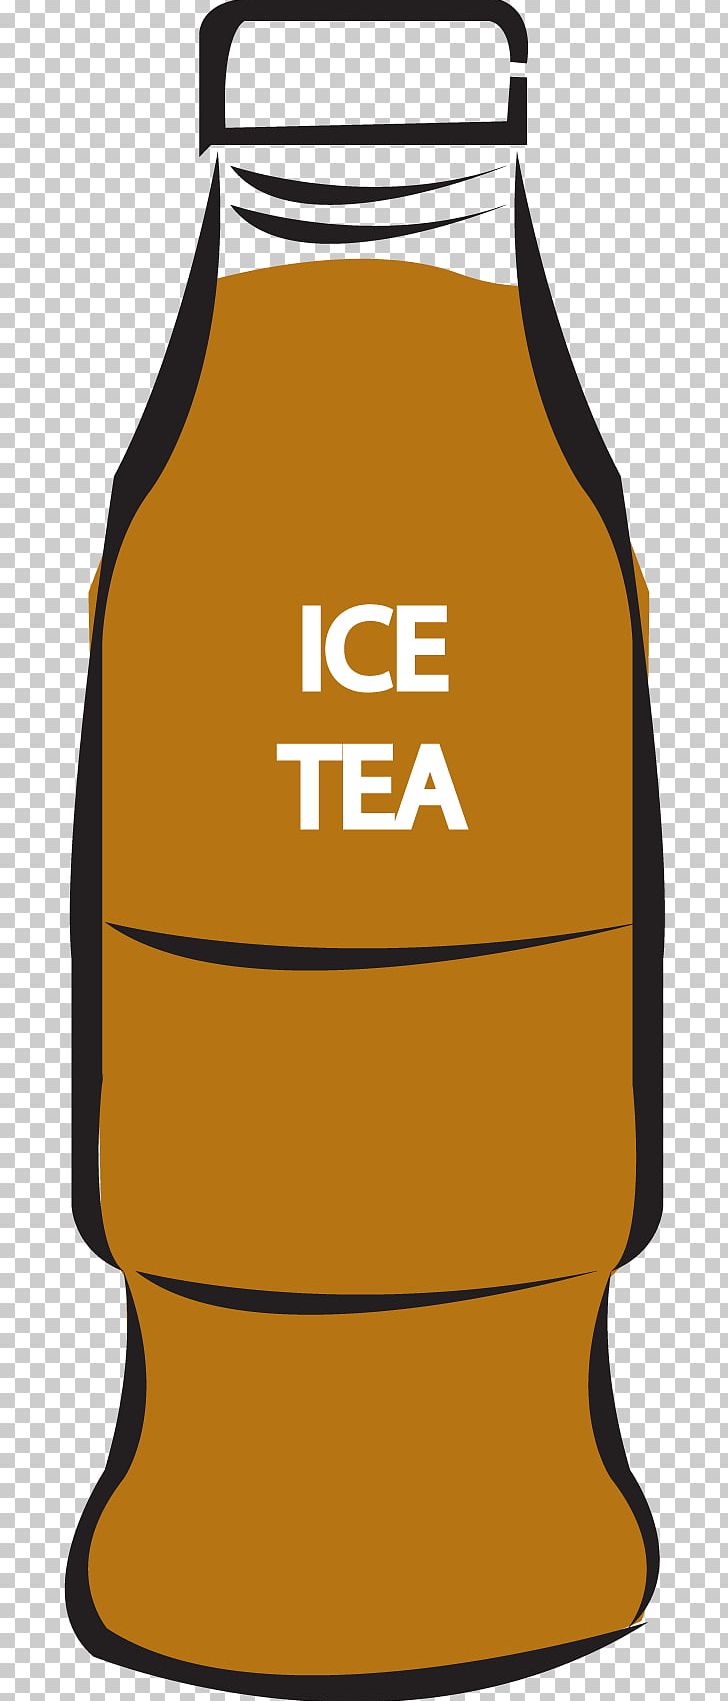 Product Design Iced Tea PNG, Clipart, Iced Tea, Icet, Yellow Free PNG Download